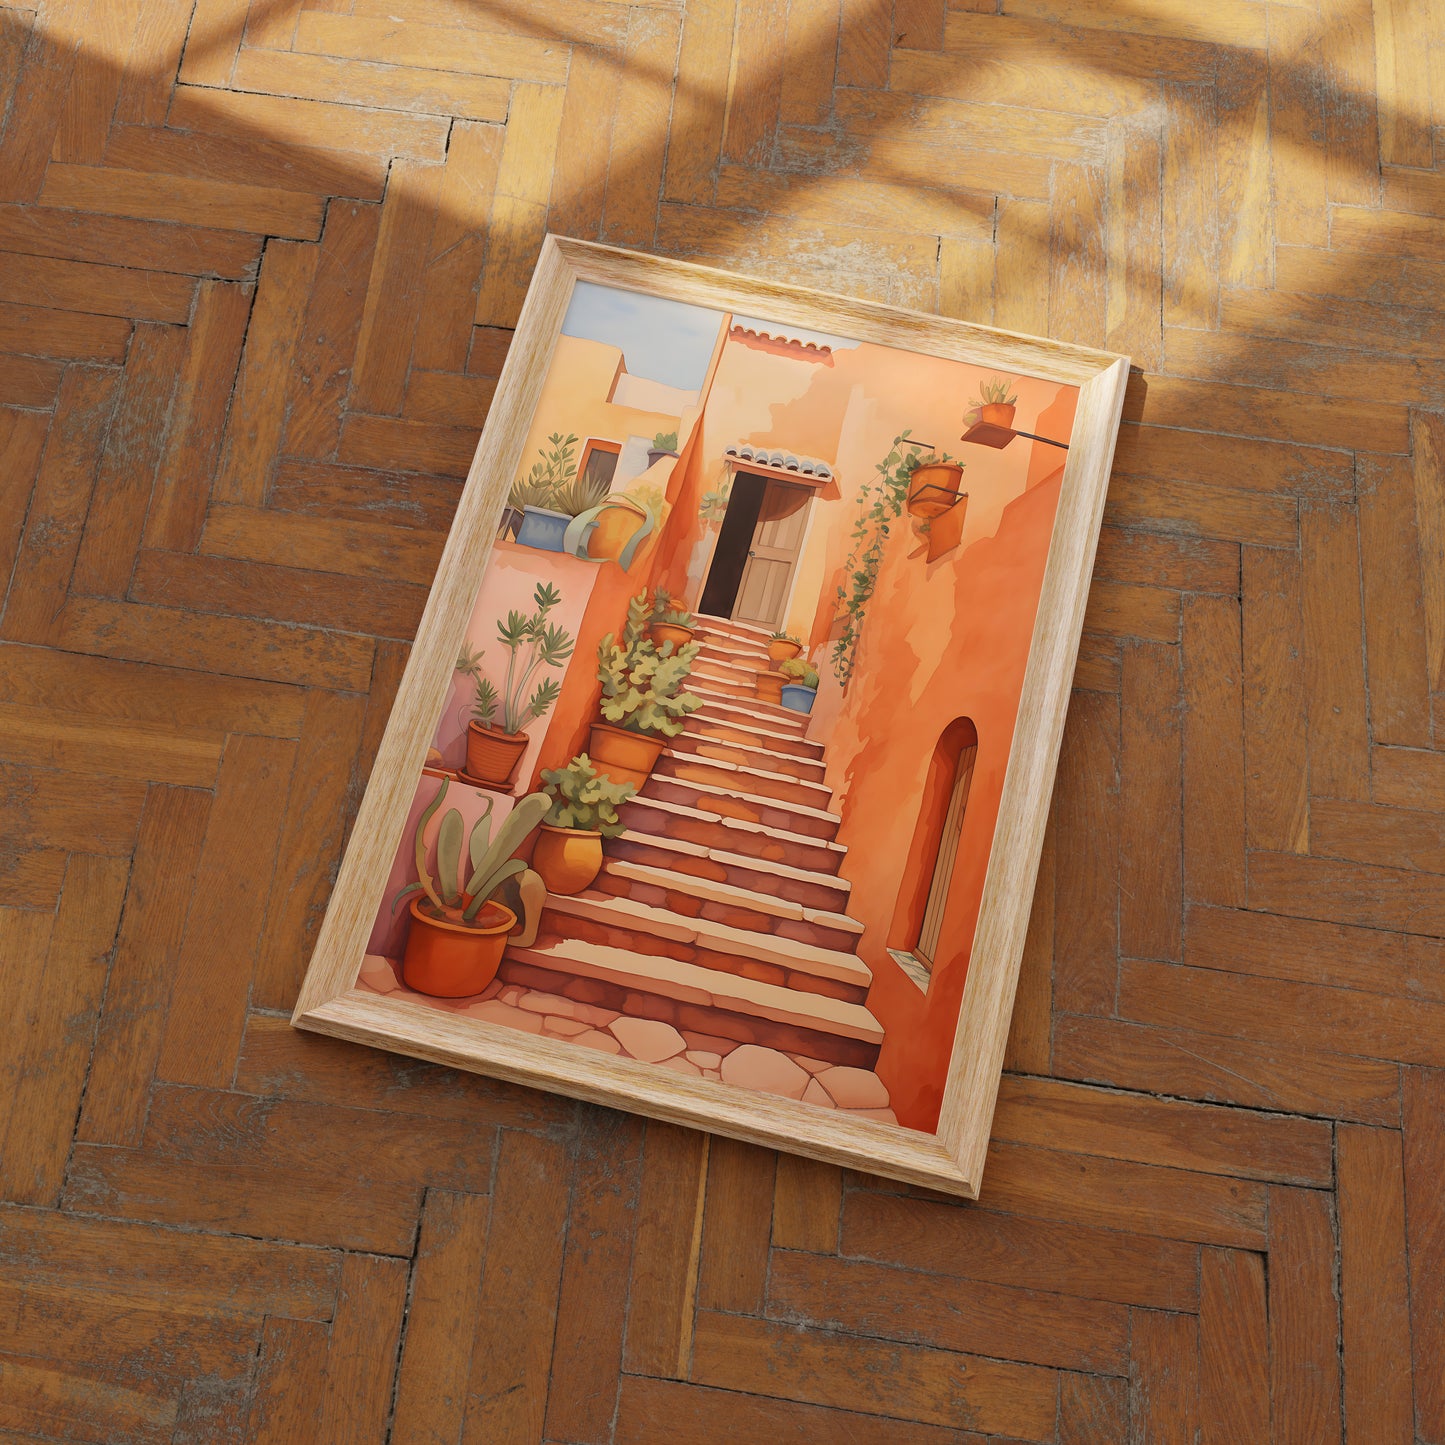 A framed painting of a Mediterranean-style staircase with plants on a wooden floor.